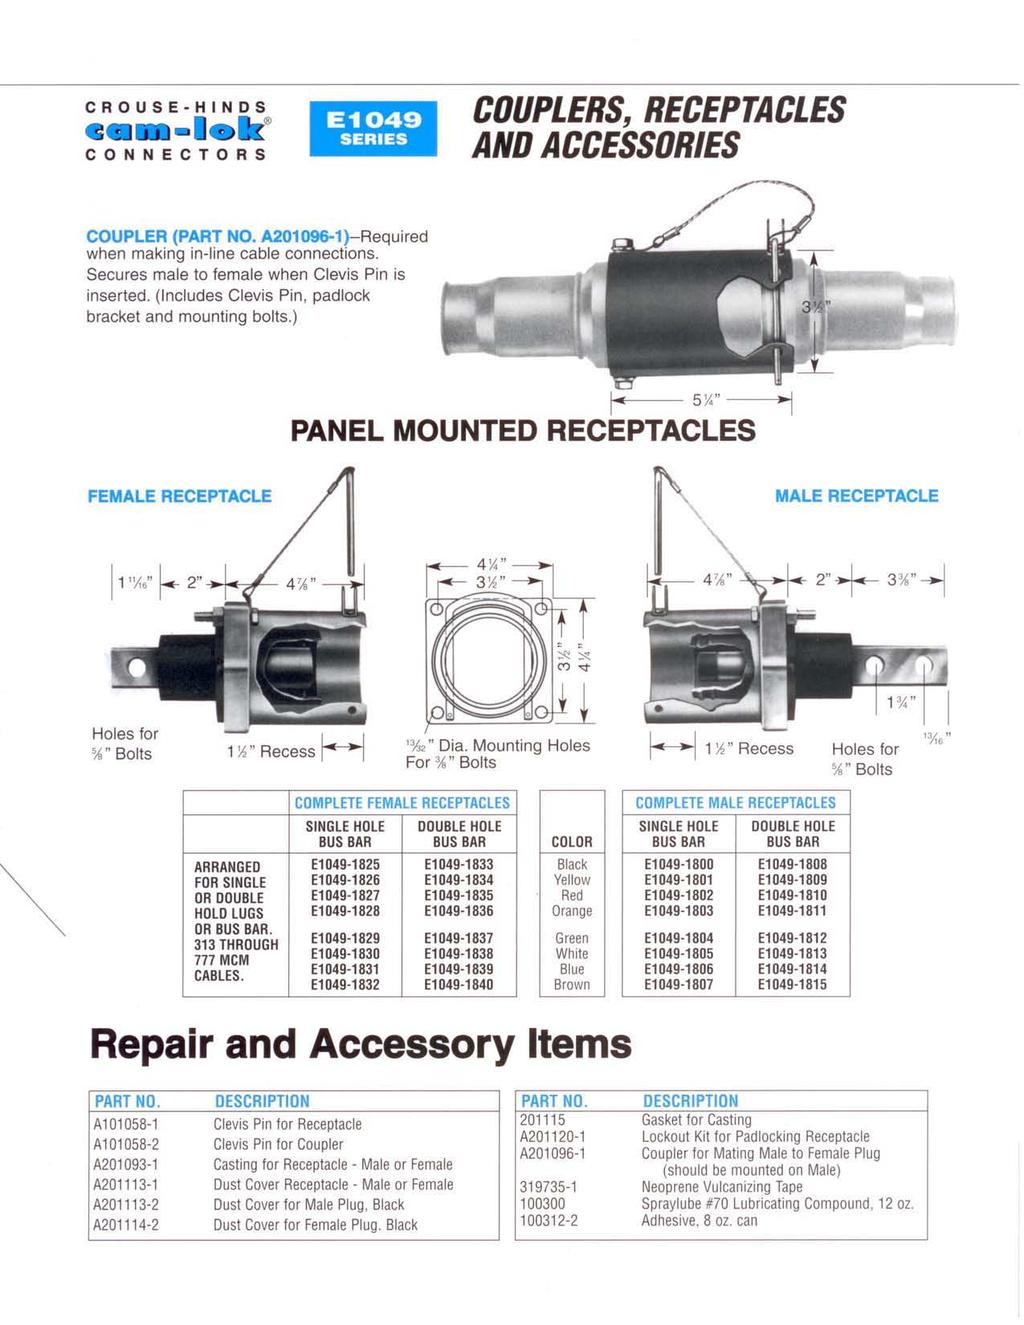 CROUSE-HINDS ca.-i E1049 SERIES COUPLERS. RECEPTACLES AND ACCESSORIES COUPLER (PART NO. A201096-1)-Required when making in-line cable connections. Secures male to female when Clevis Pin is inserted.